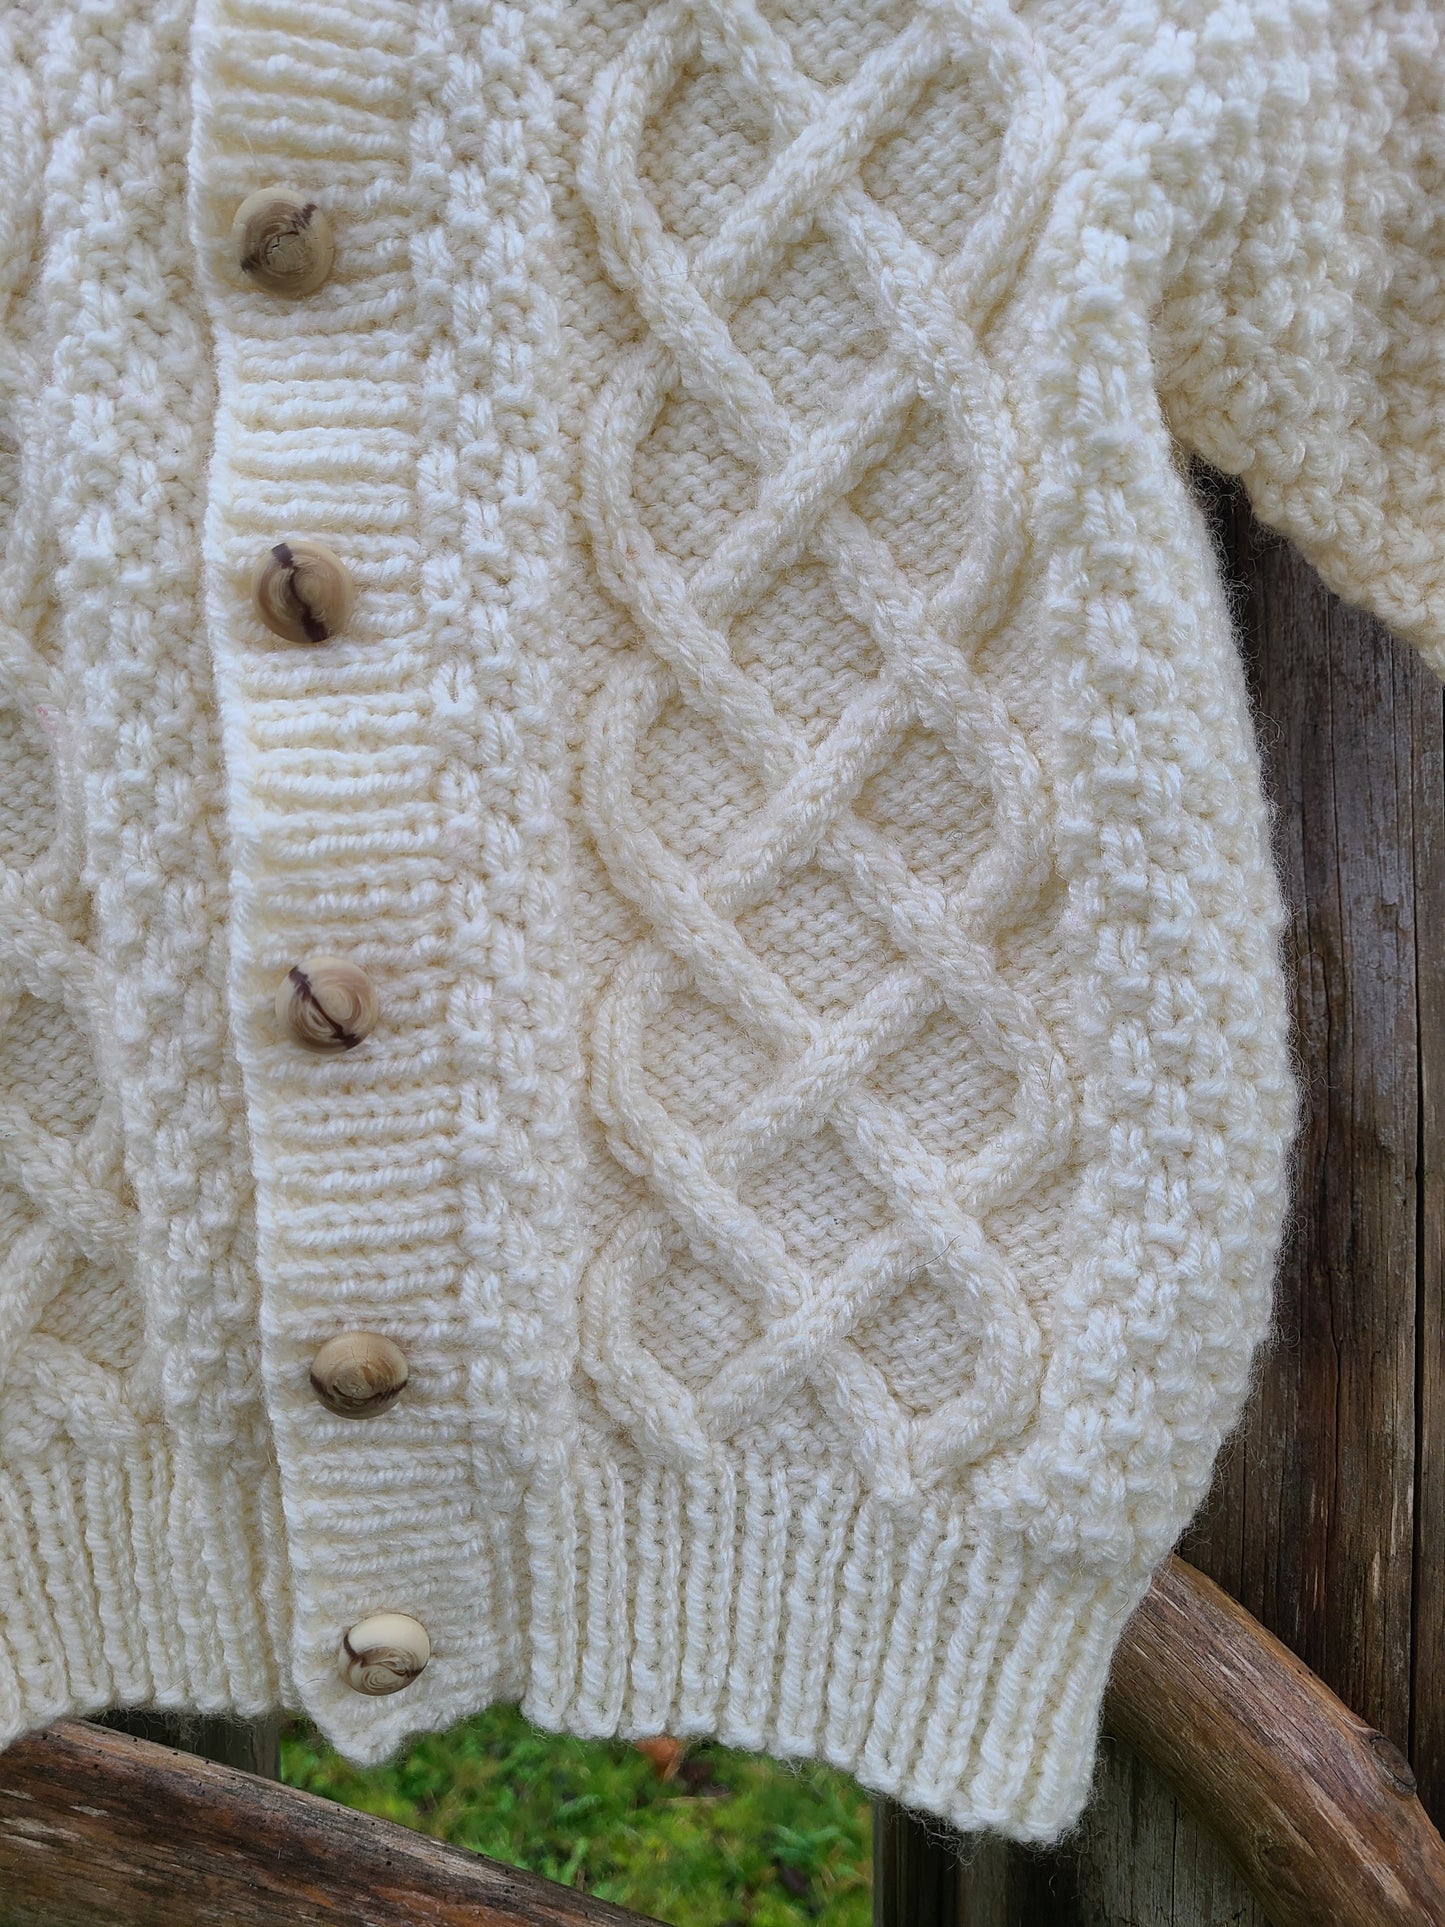 The Handmade Children’s Cable Knit Hooded Cardigan Sweater